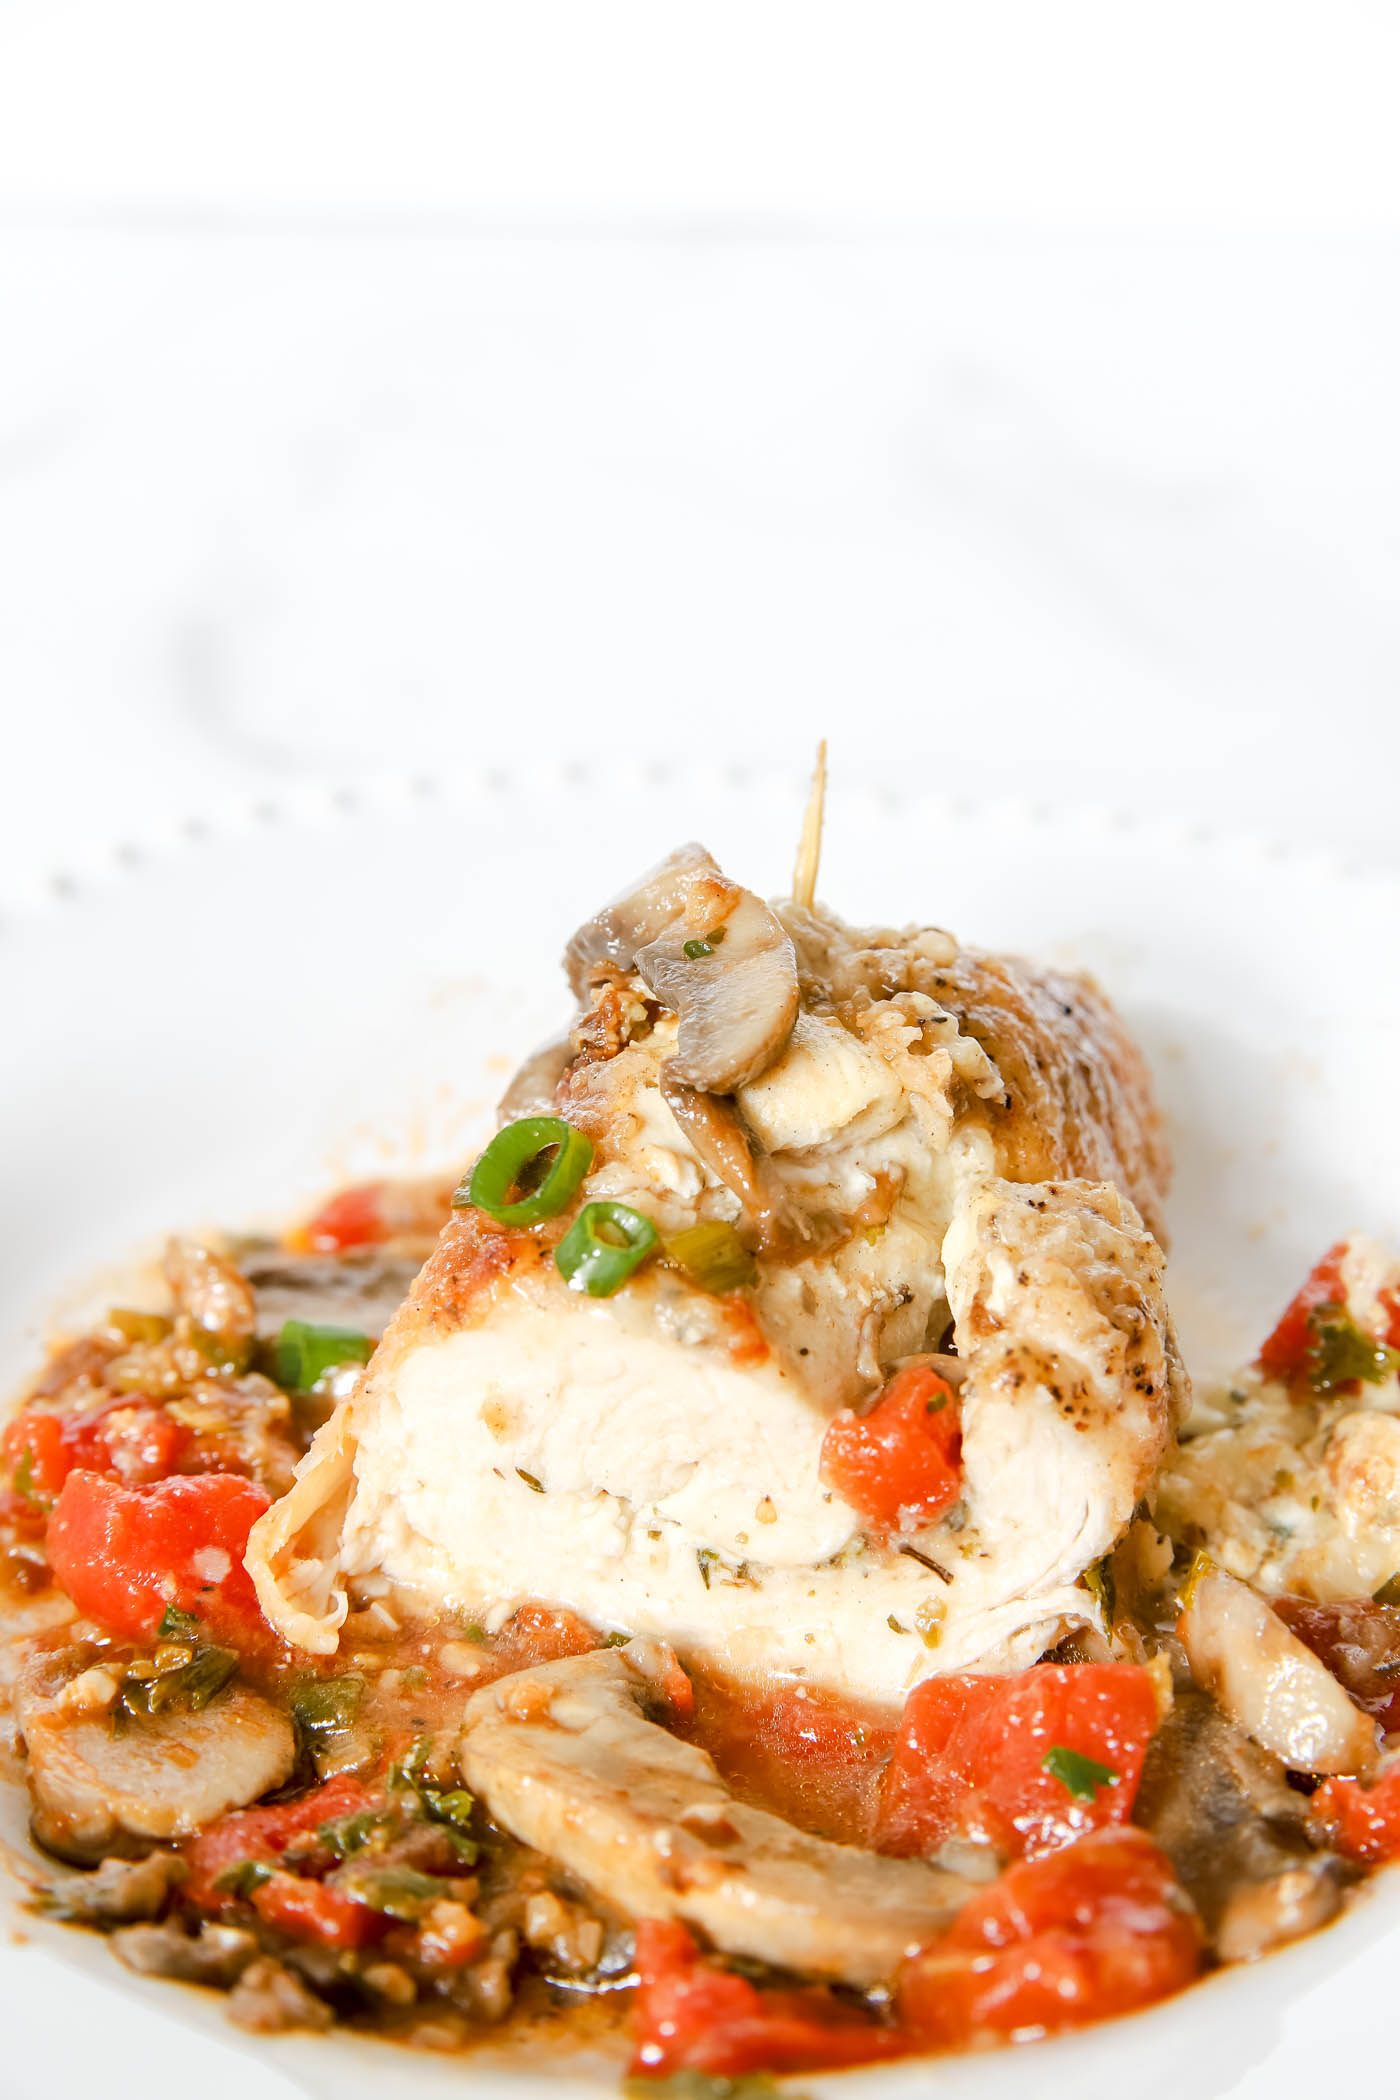 Tomatoes and Mushrooms with Italian Roll-Up Chicken